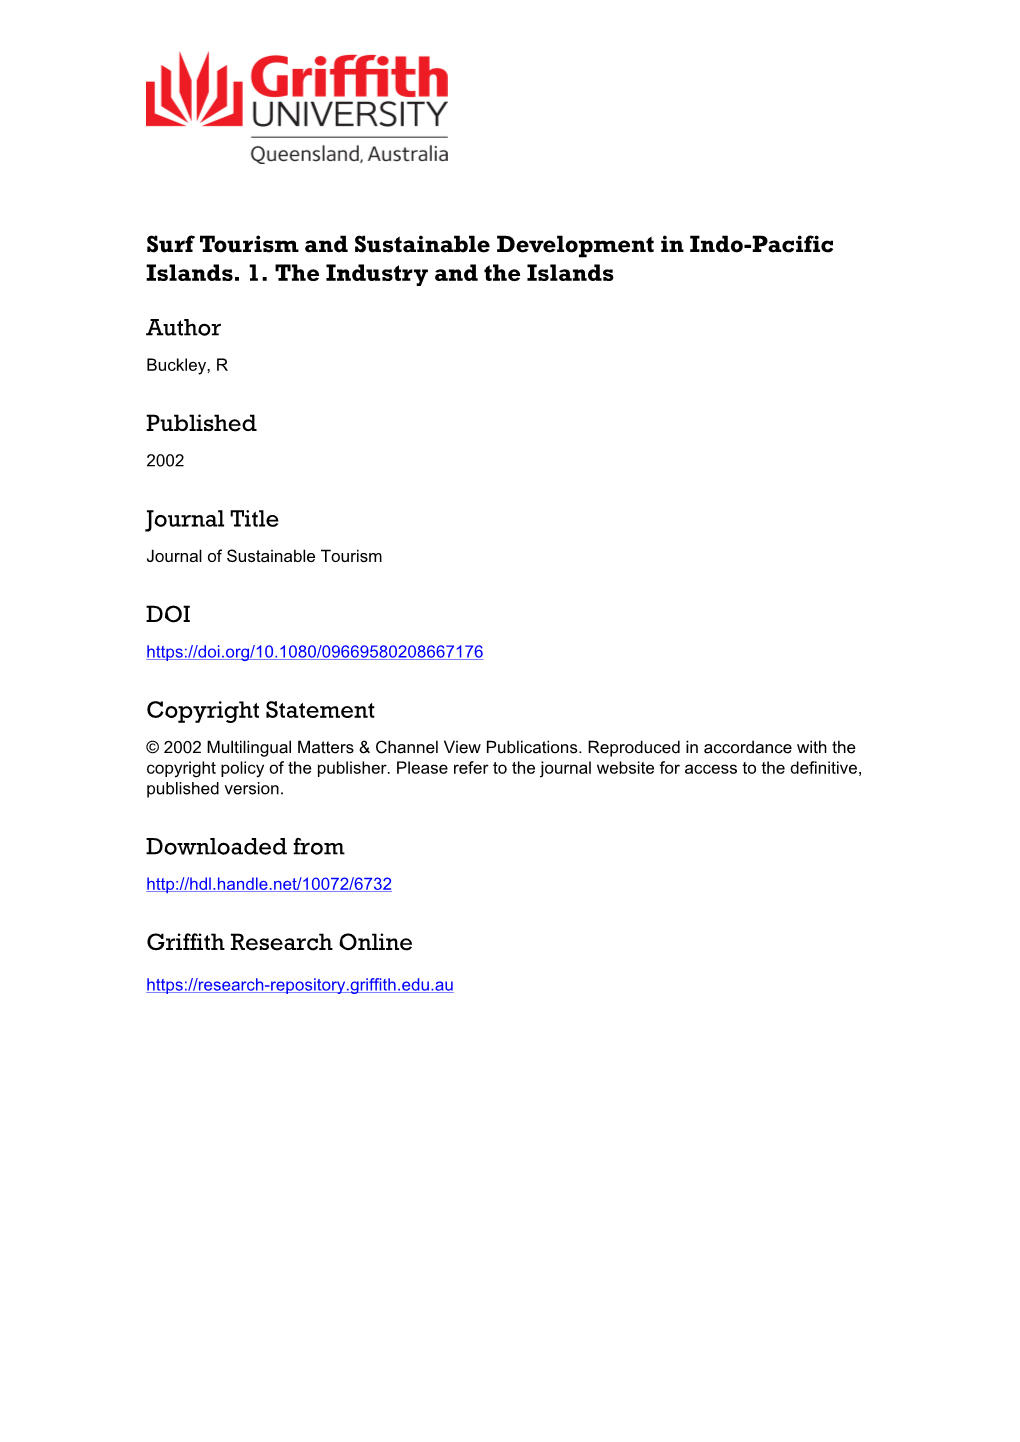 Surf Tourism and Sustainable Development in Indo-Pacific Islands